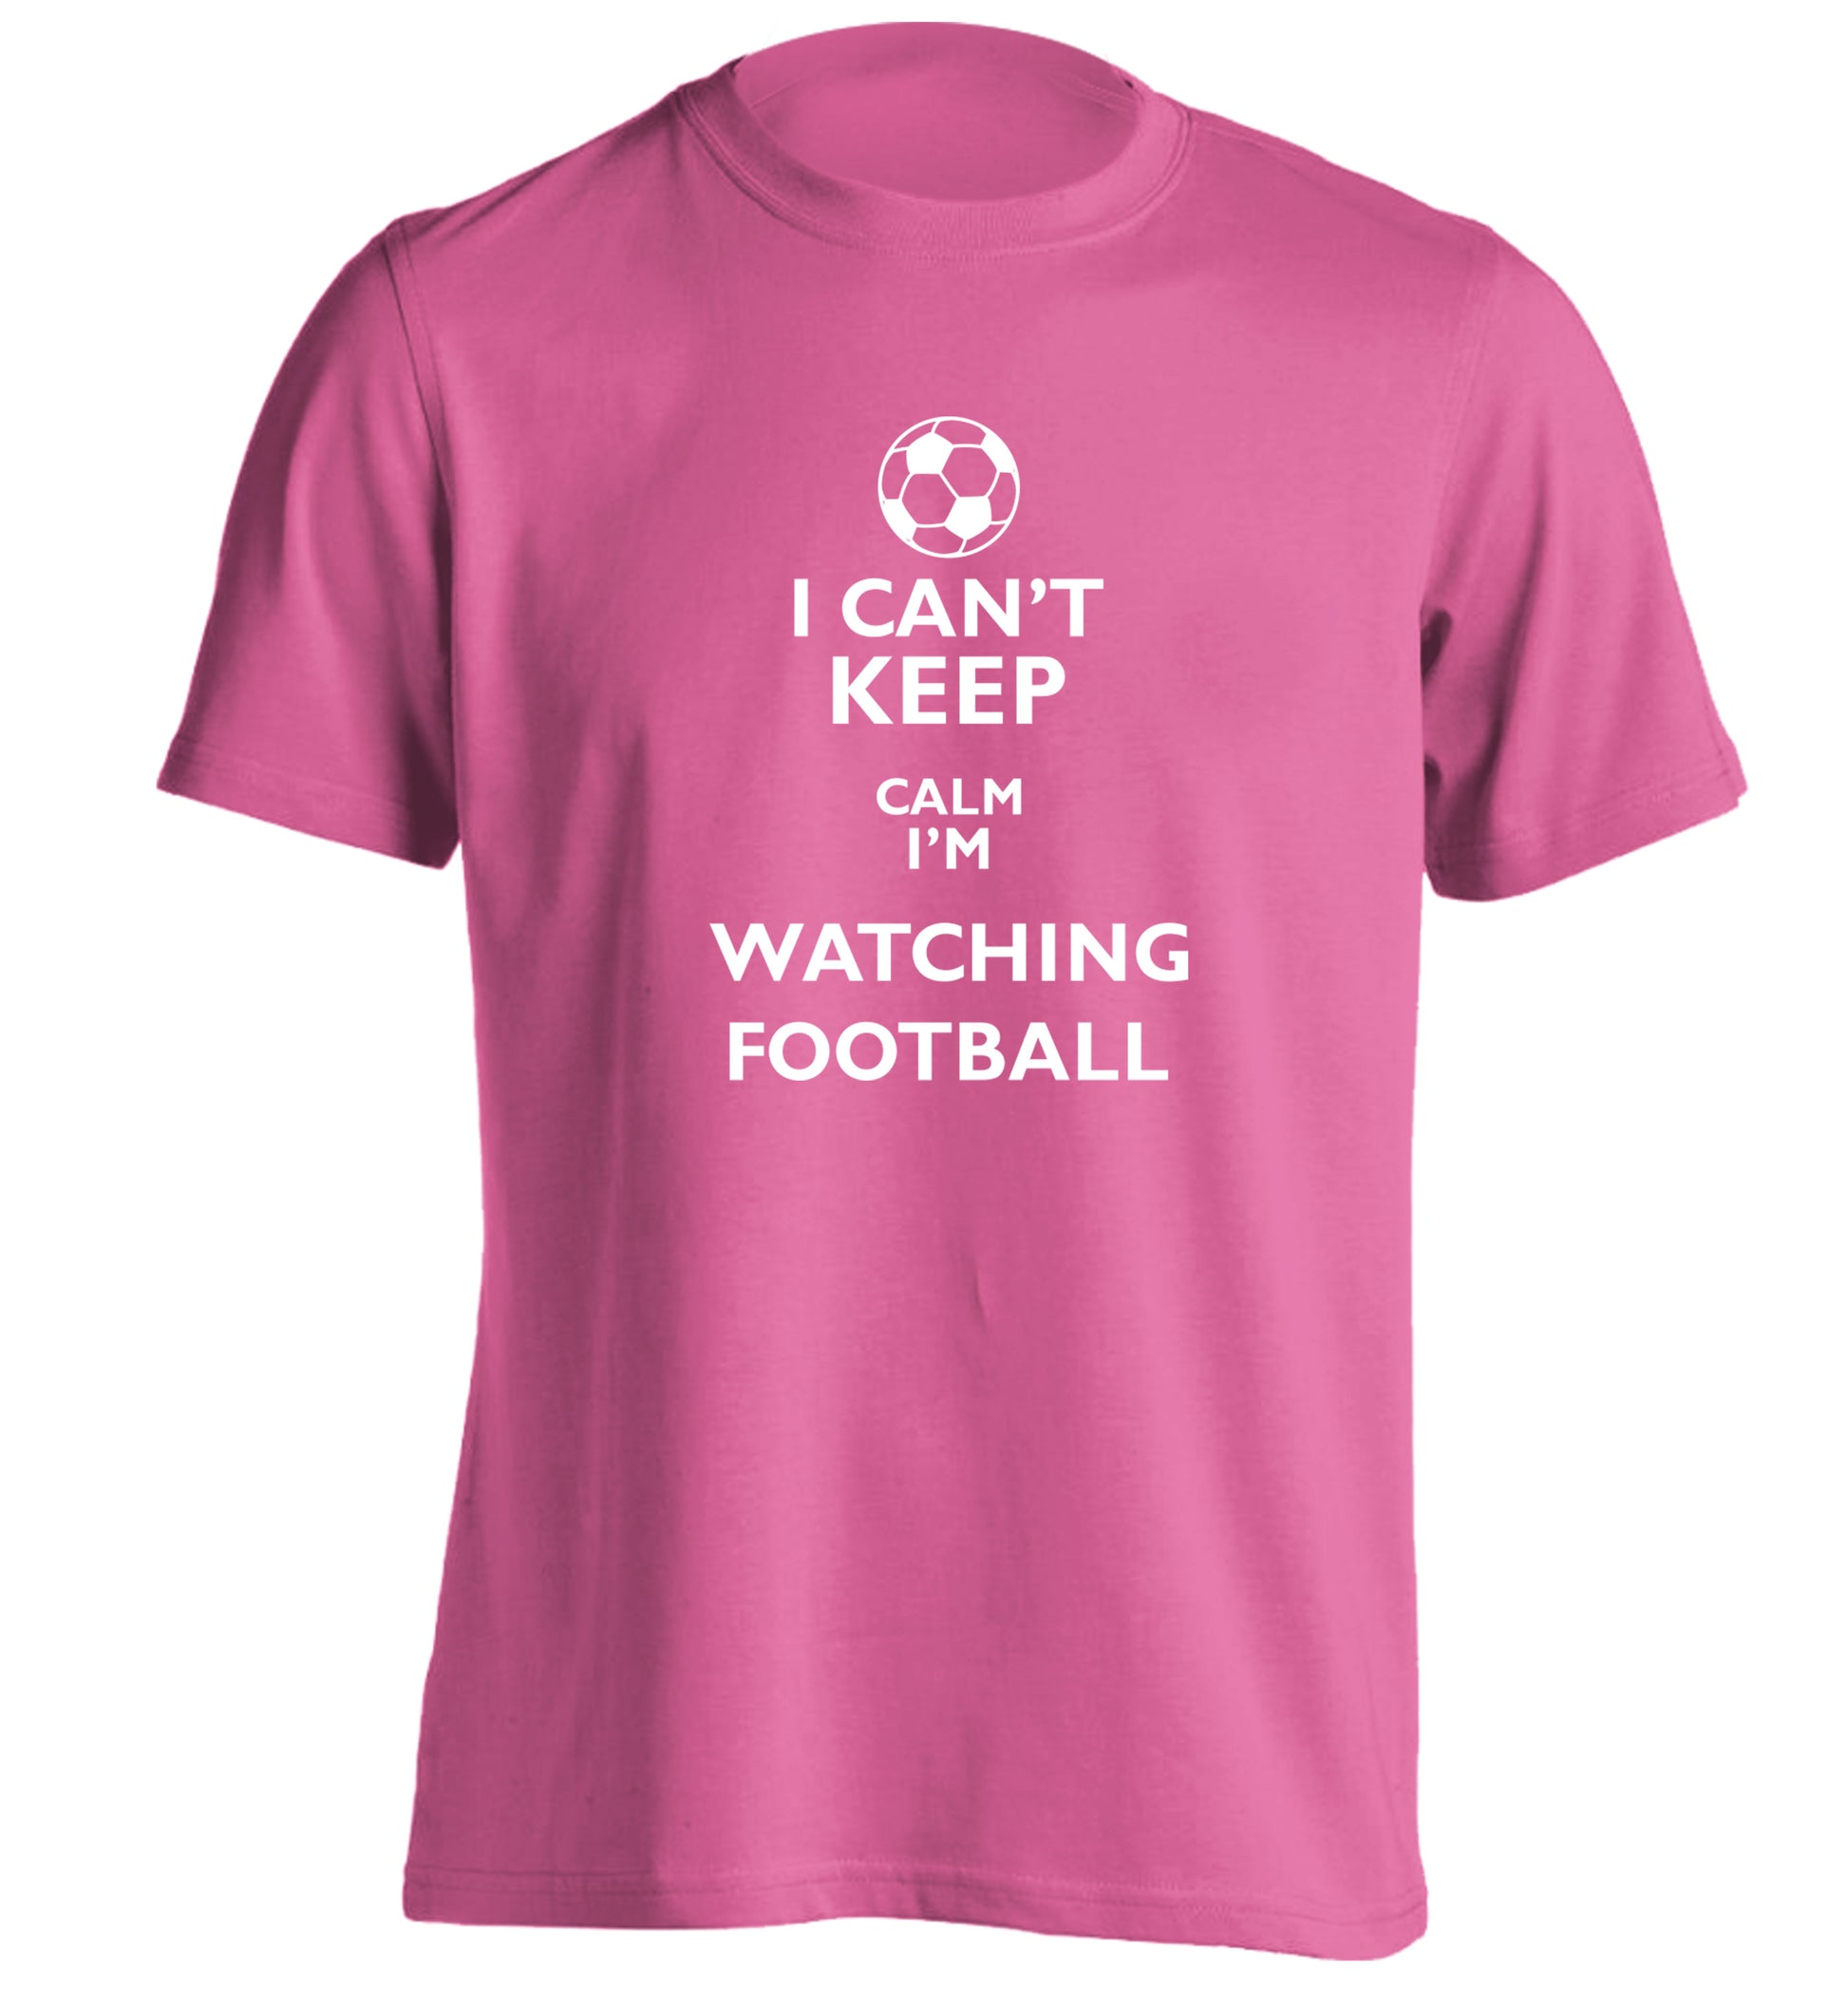 I can't keep calm I'm watching the football adults unisexpink Tshirt 2XL